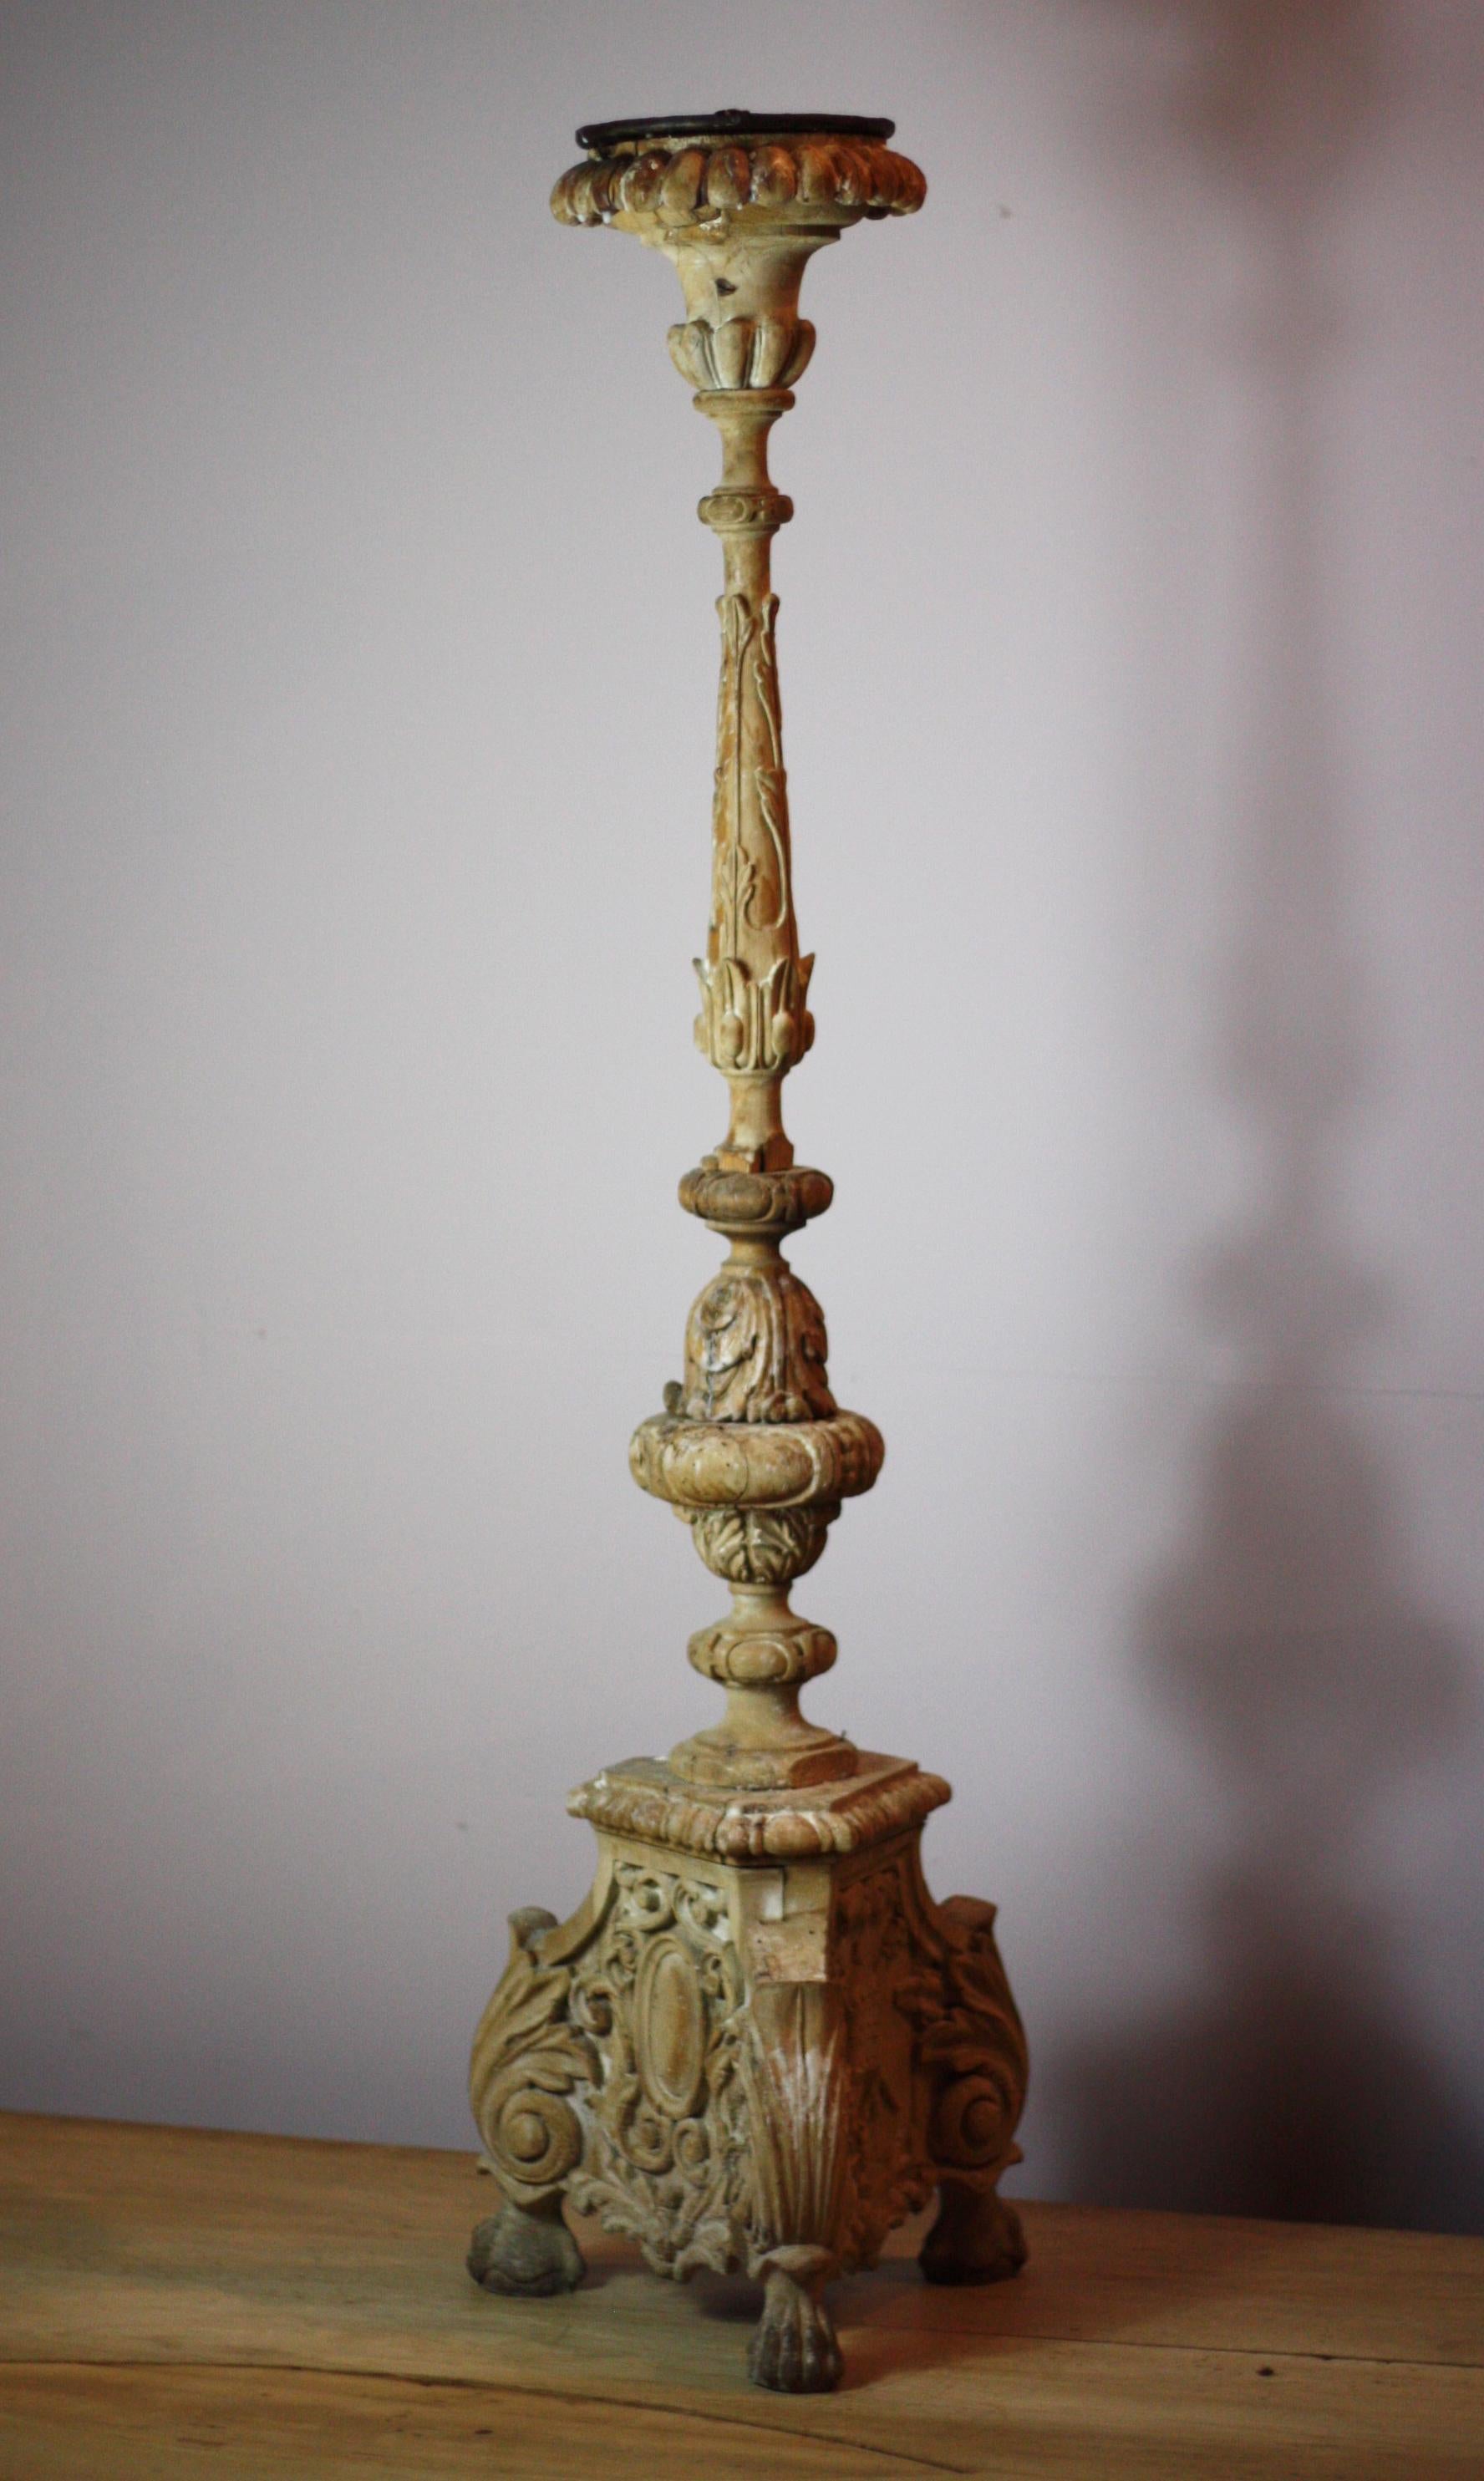 Highly decorative Italian ecclesiastical candleholder with metal plate at the top, and original wax drippings.